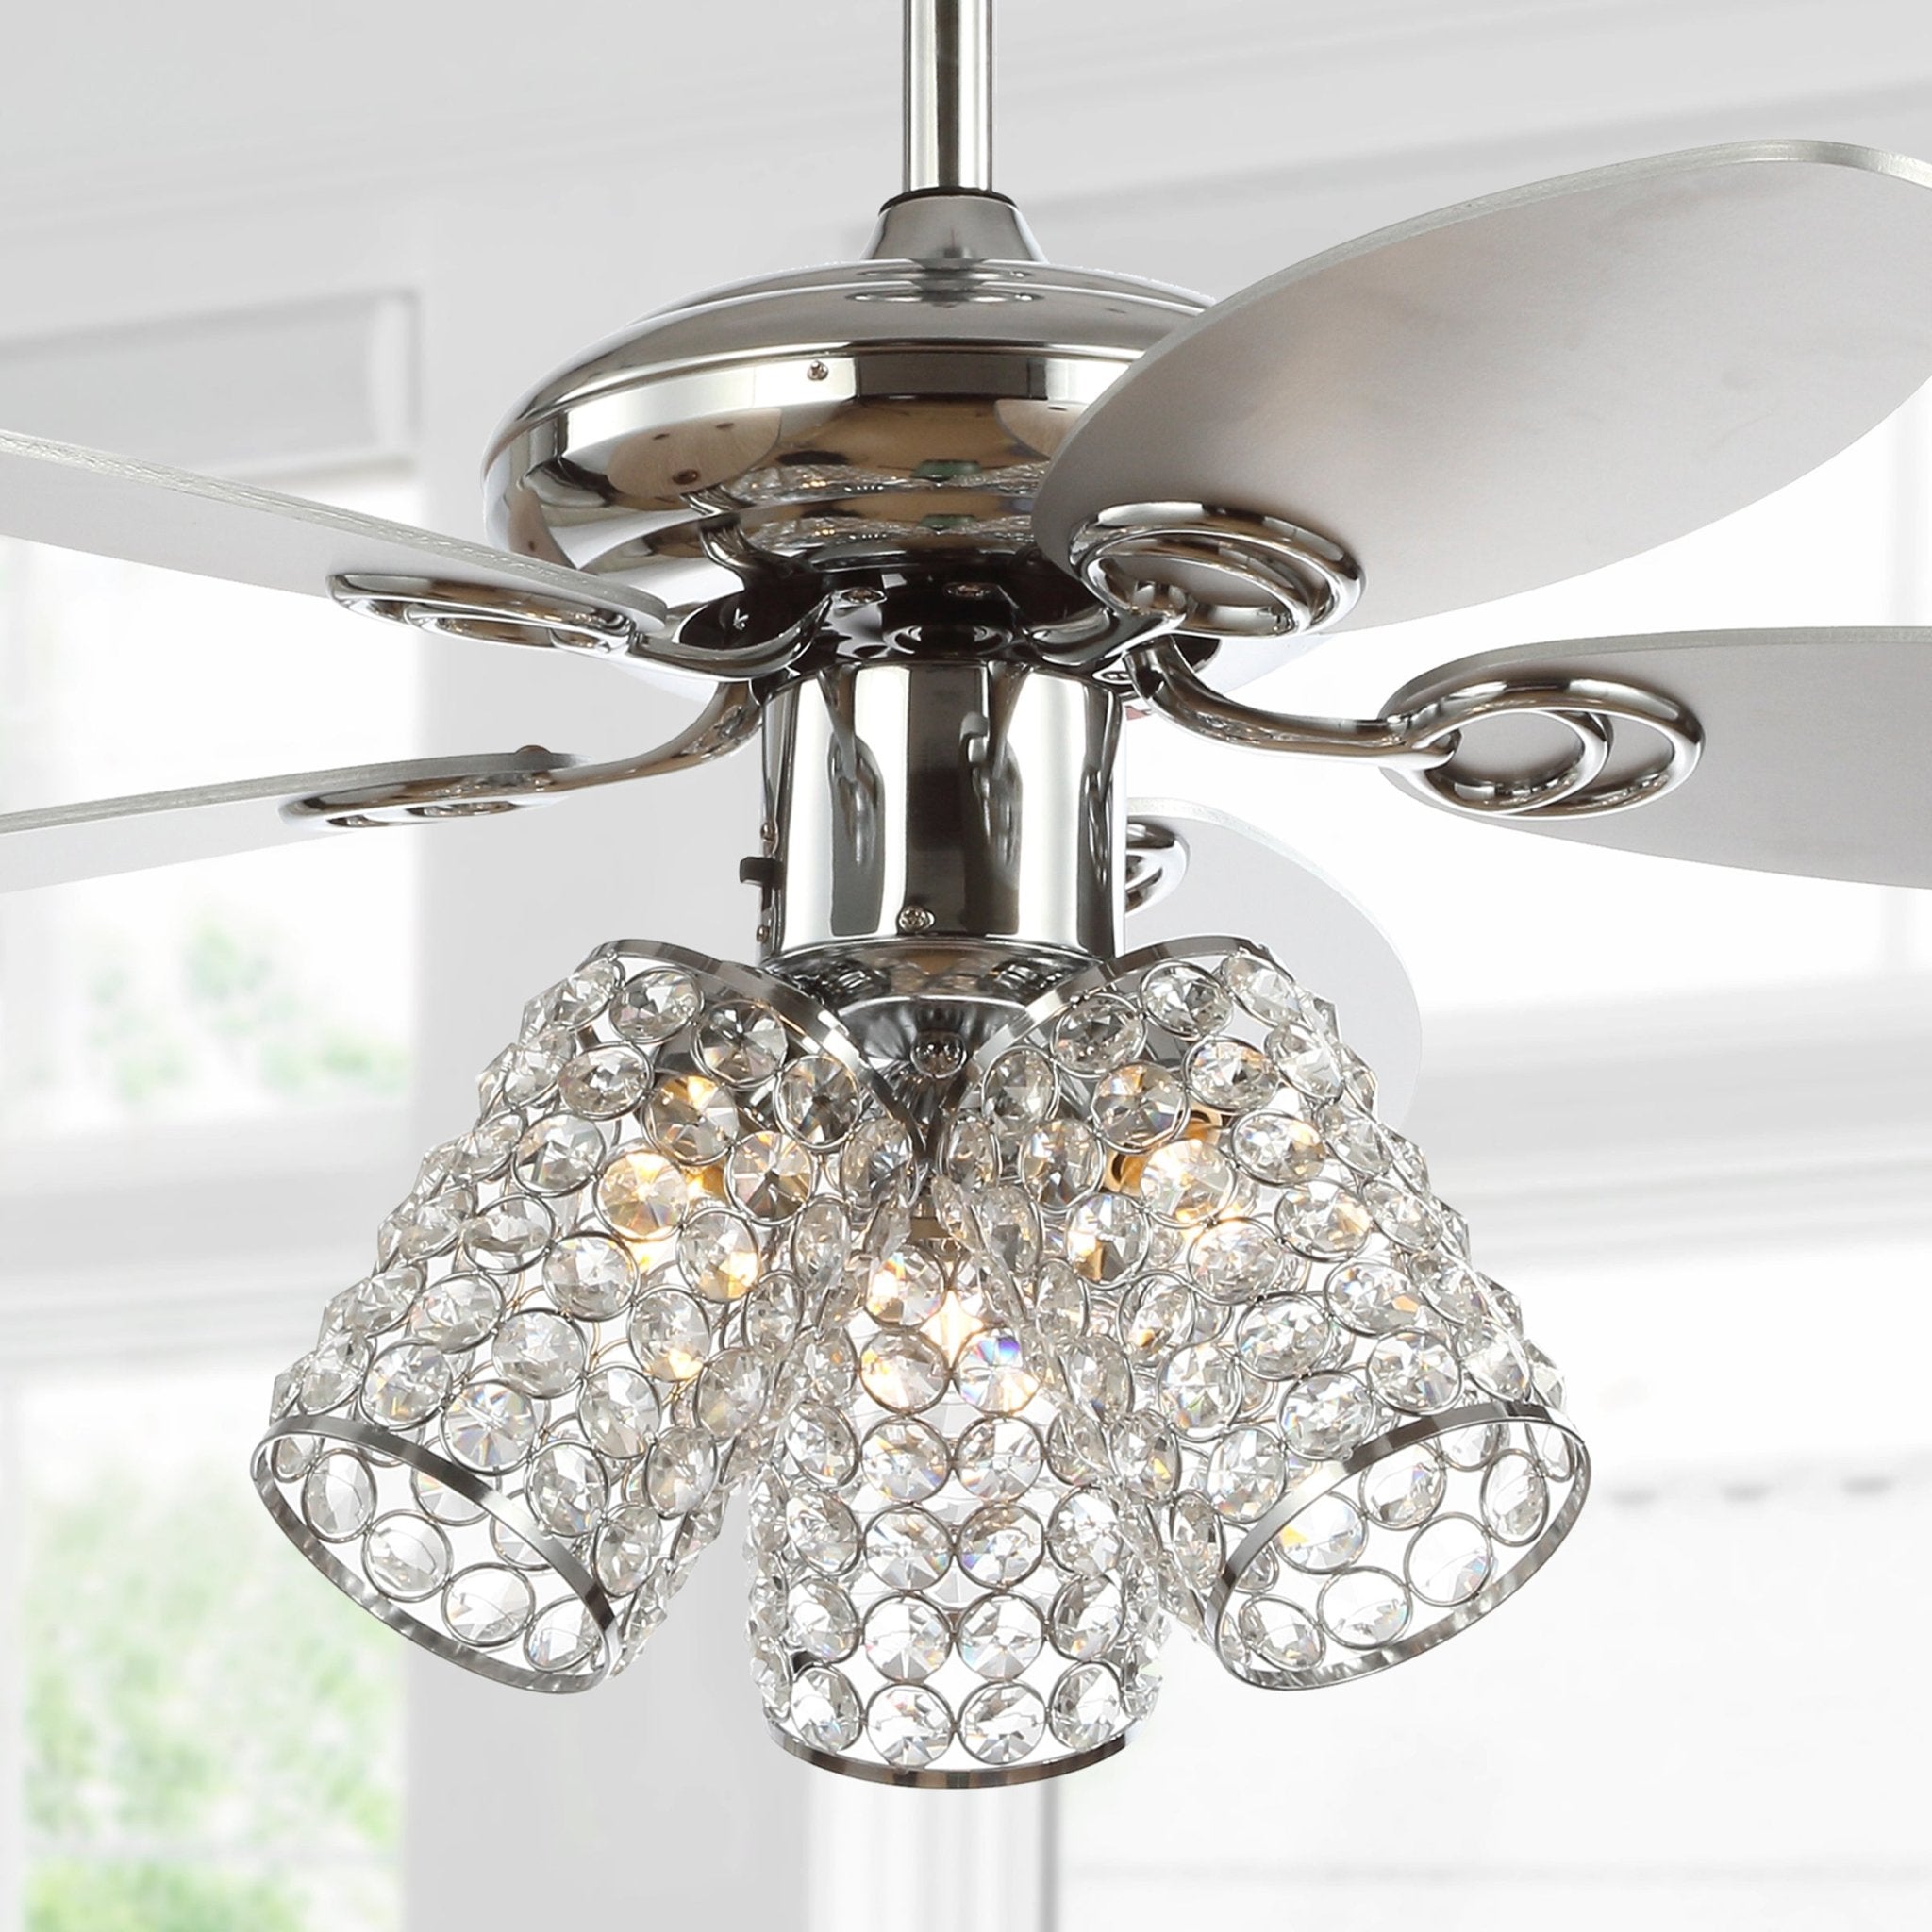 Kris Light Crystal LED Ceiling Fan With Remote - Fans